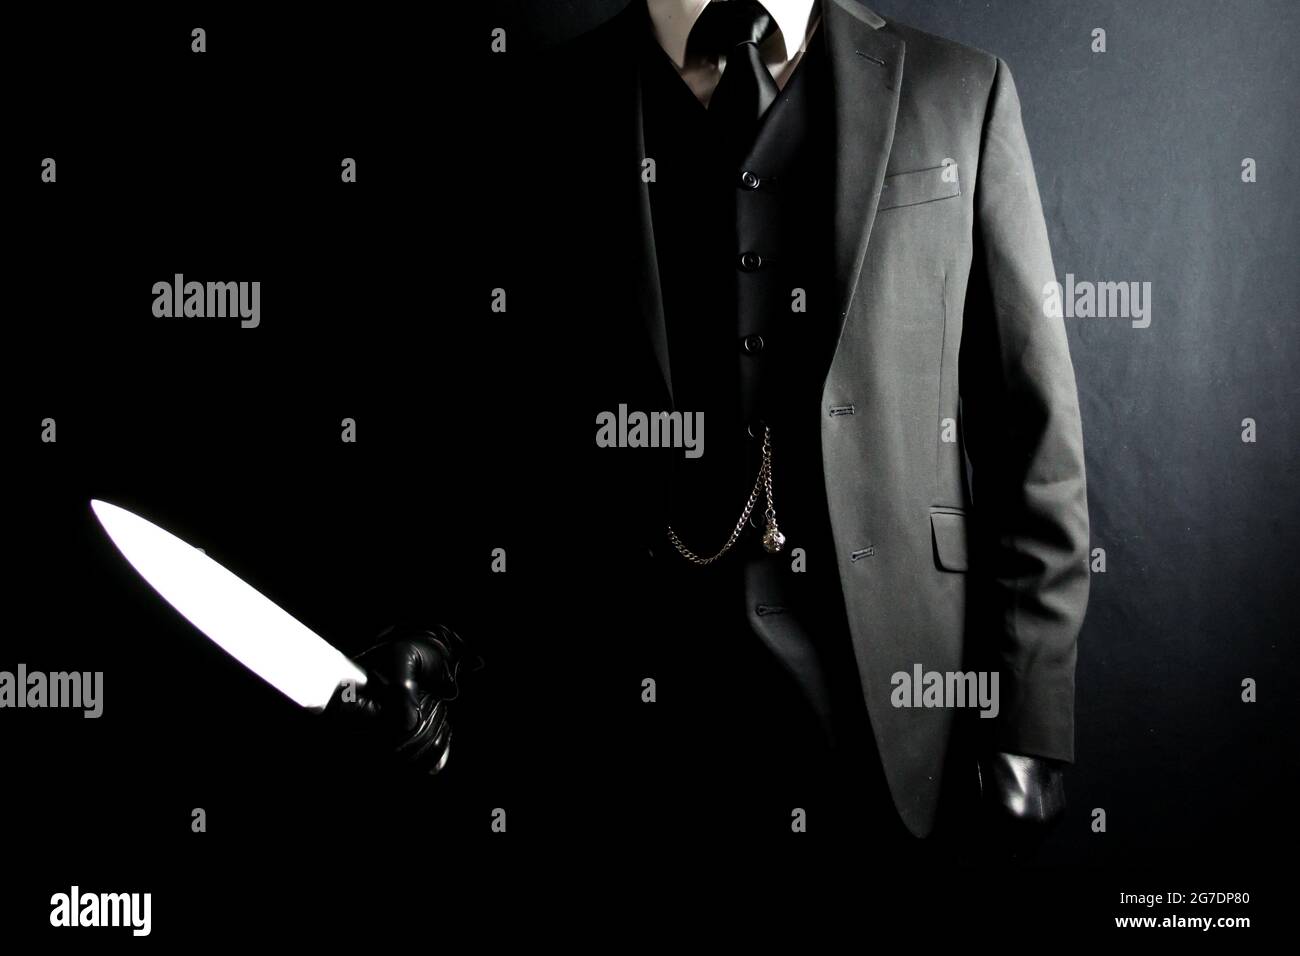 Portrait of Man in Dark Suit and Leather Gloves Holding Sharp Knife on Black Background. Well Dressed Gentleman Killer. Mafia Hit Man in Stylish Suit. Stock Photo